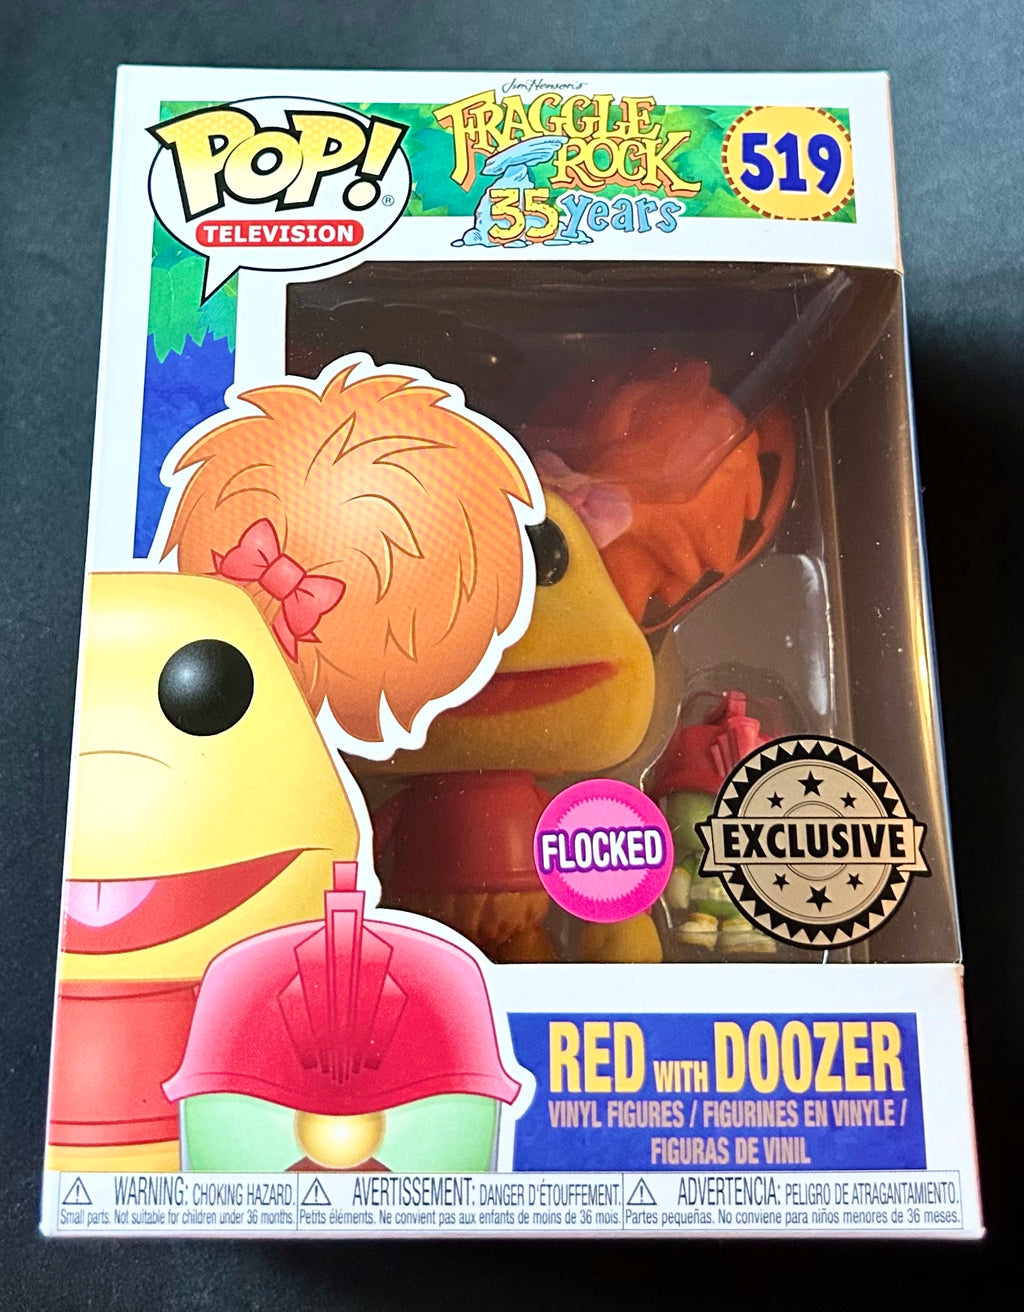 Fraggle Rock 35 Years Anniversary Red with Doozer Flocked Exclusive 519 Funko POP!